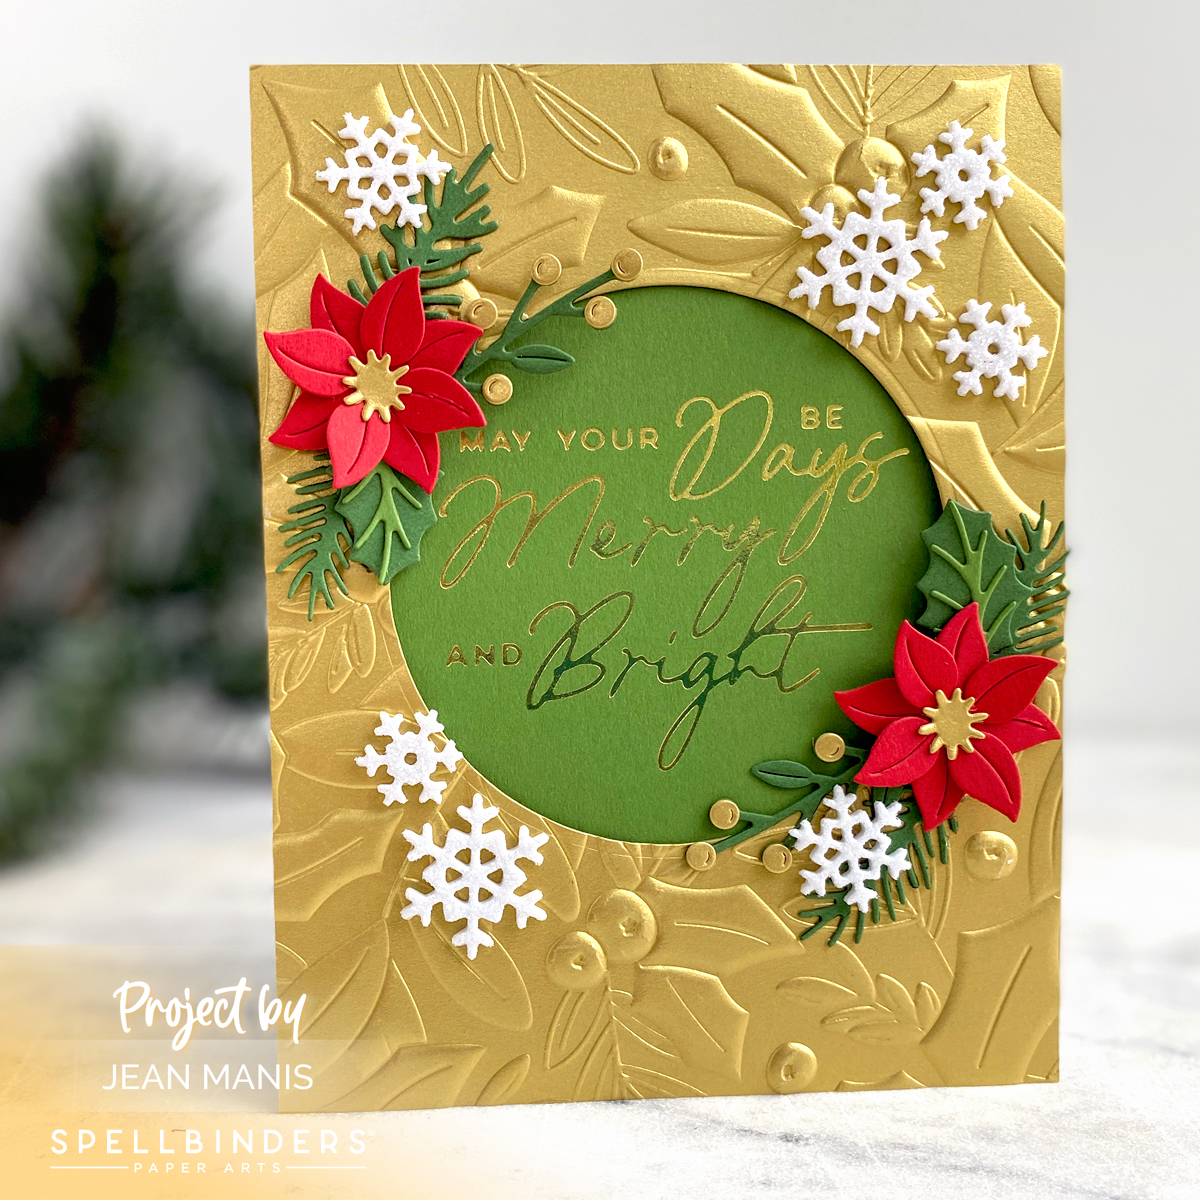 Spellbinders | Merry and Bright